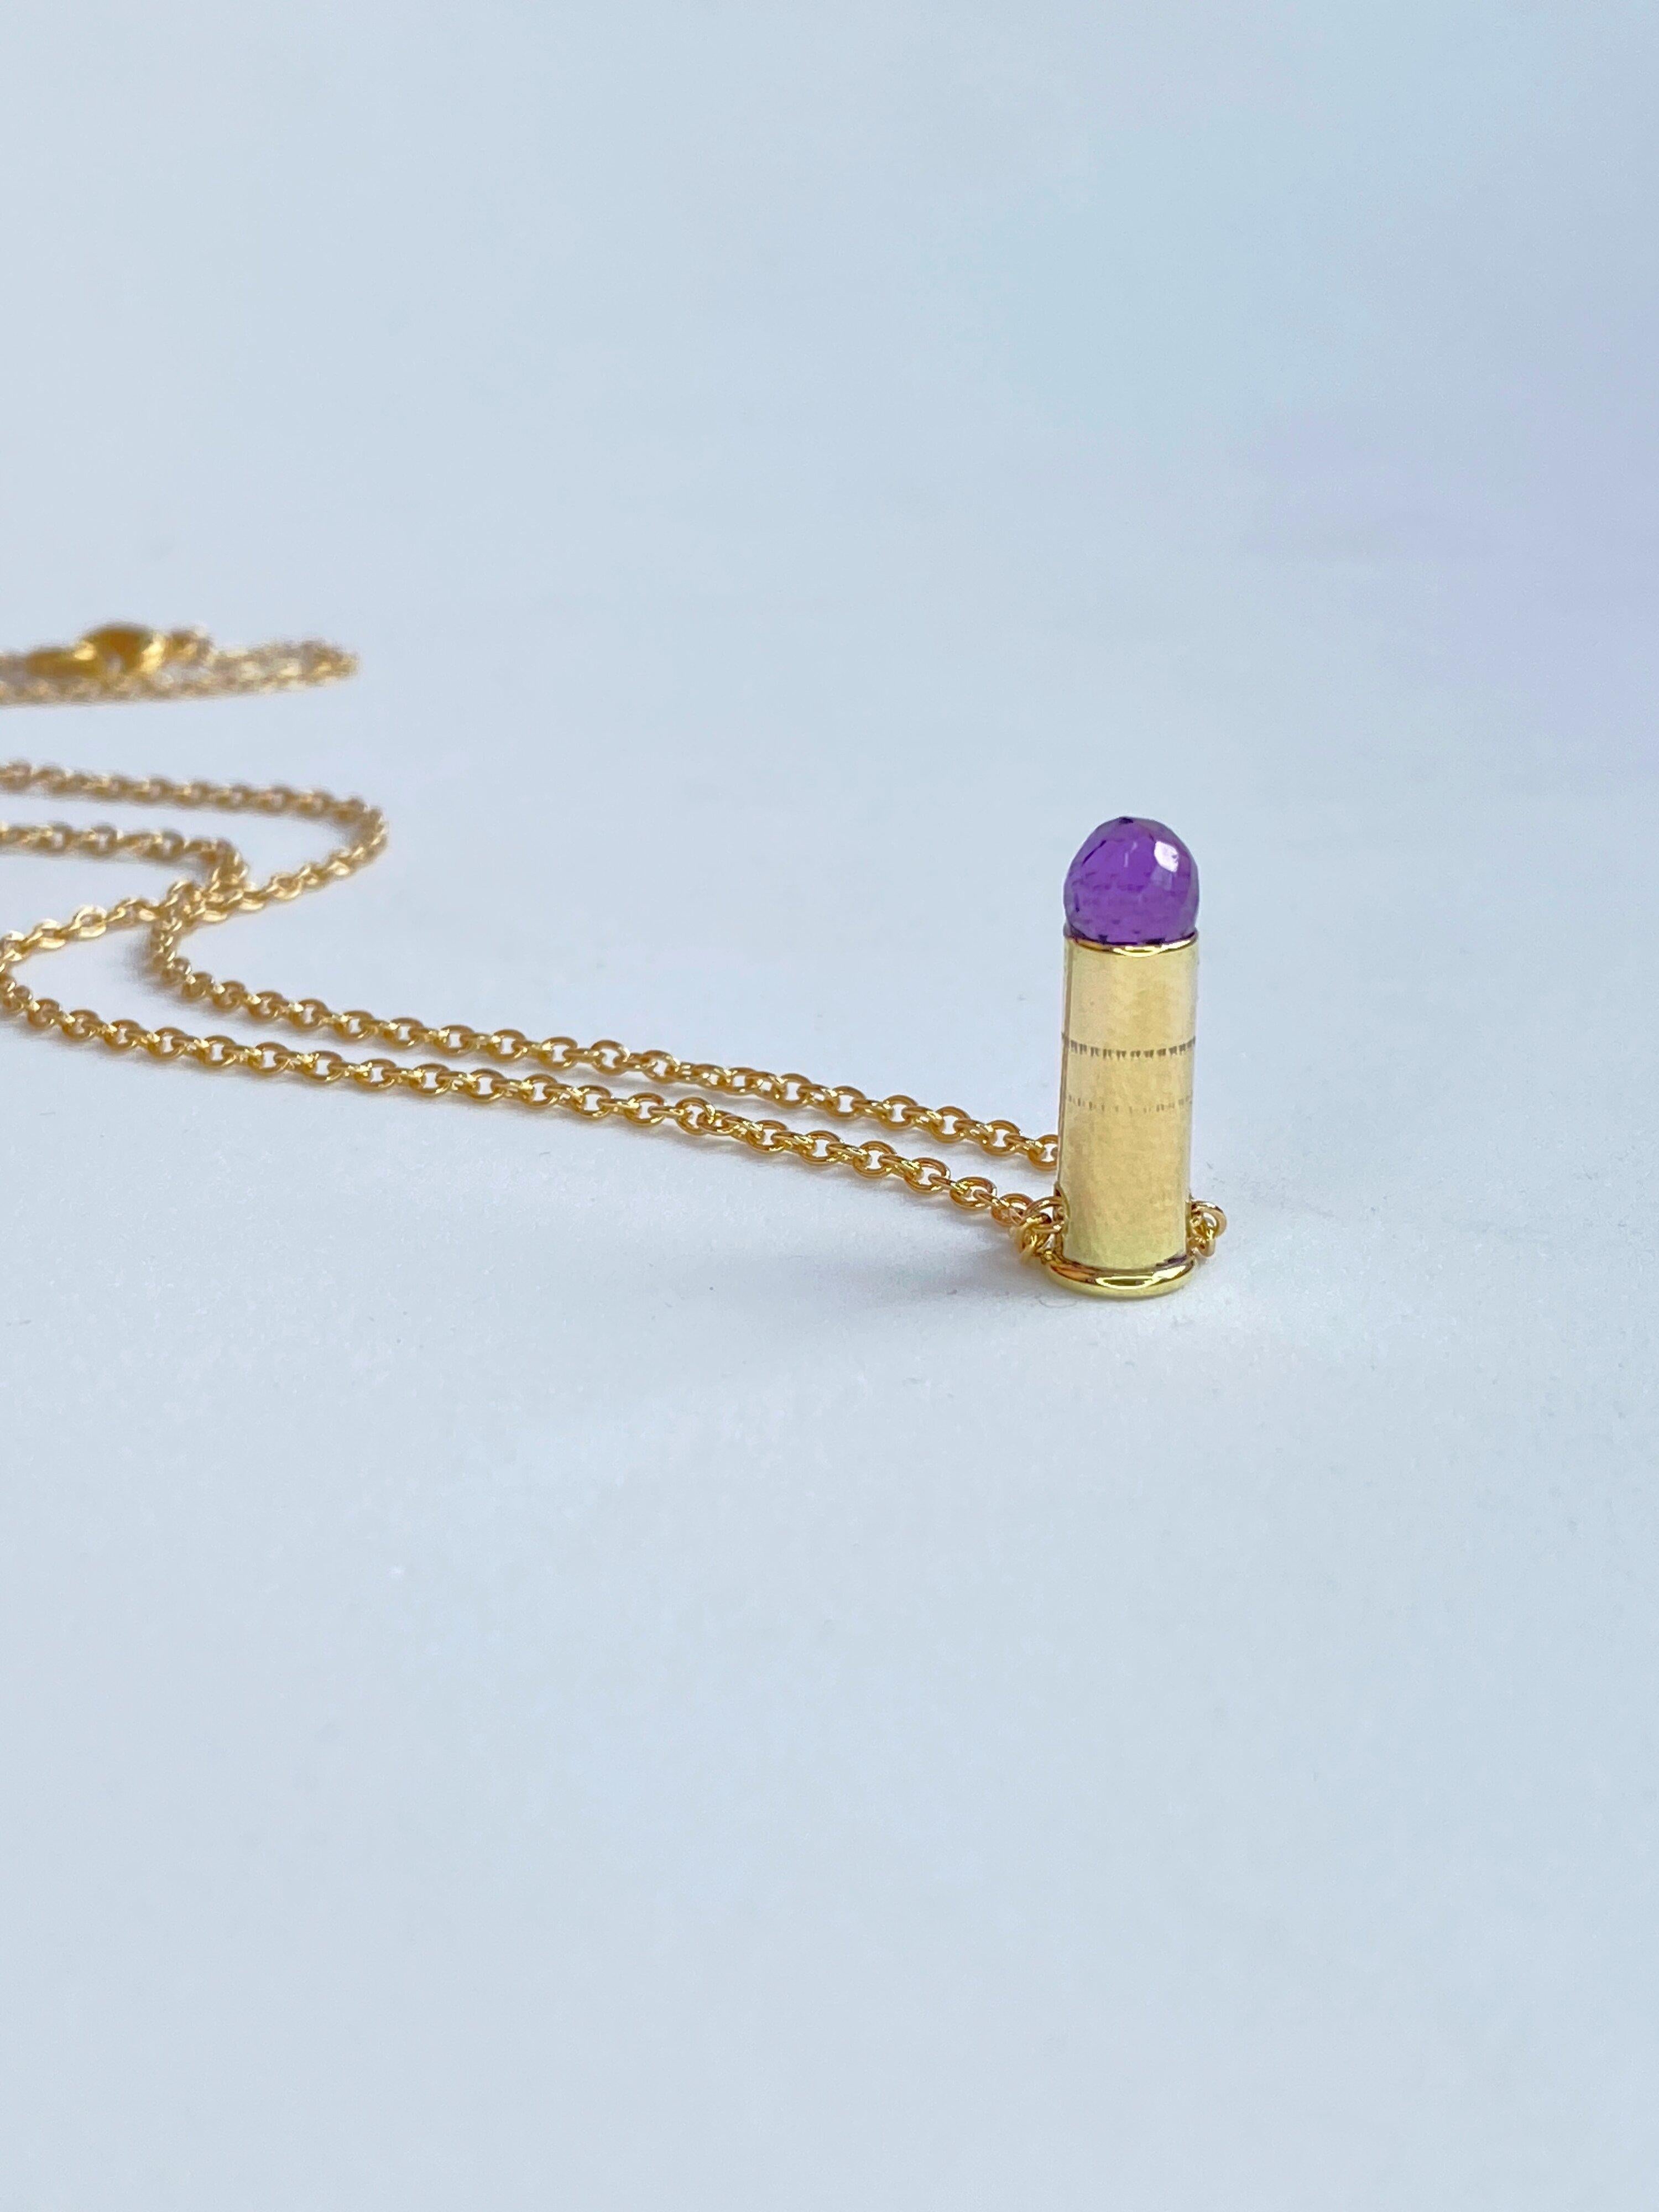 Artist Gold filled bullet and Amethyst pendant necklace. For Sale